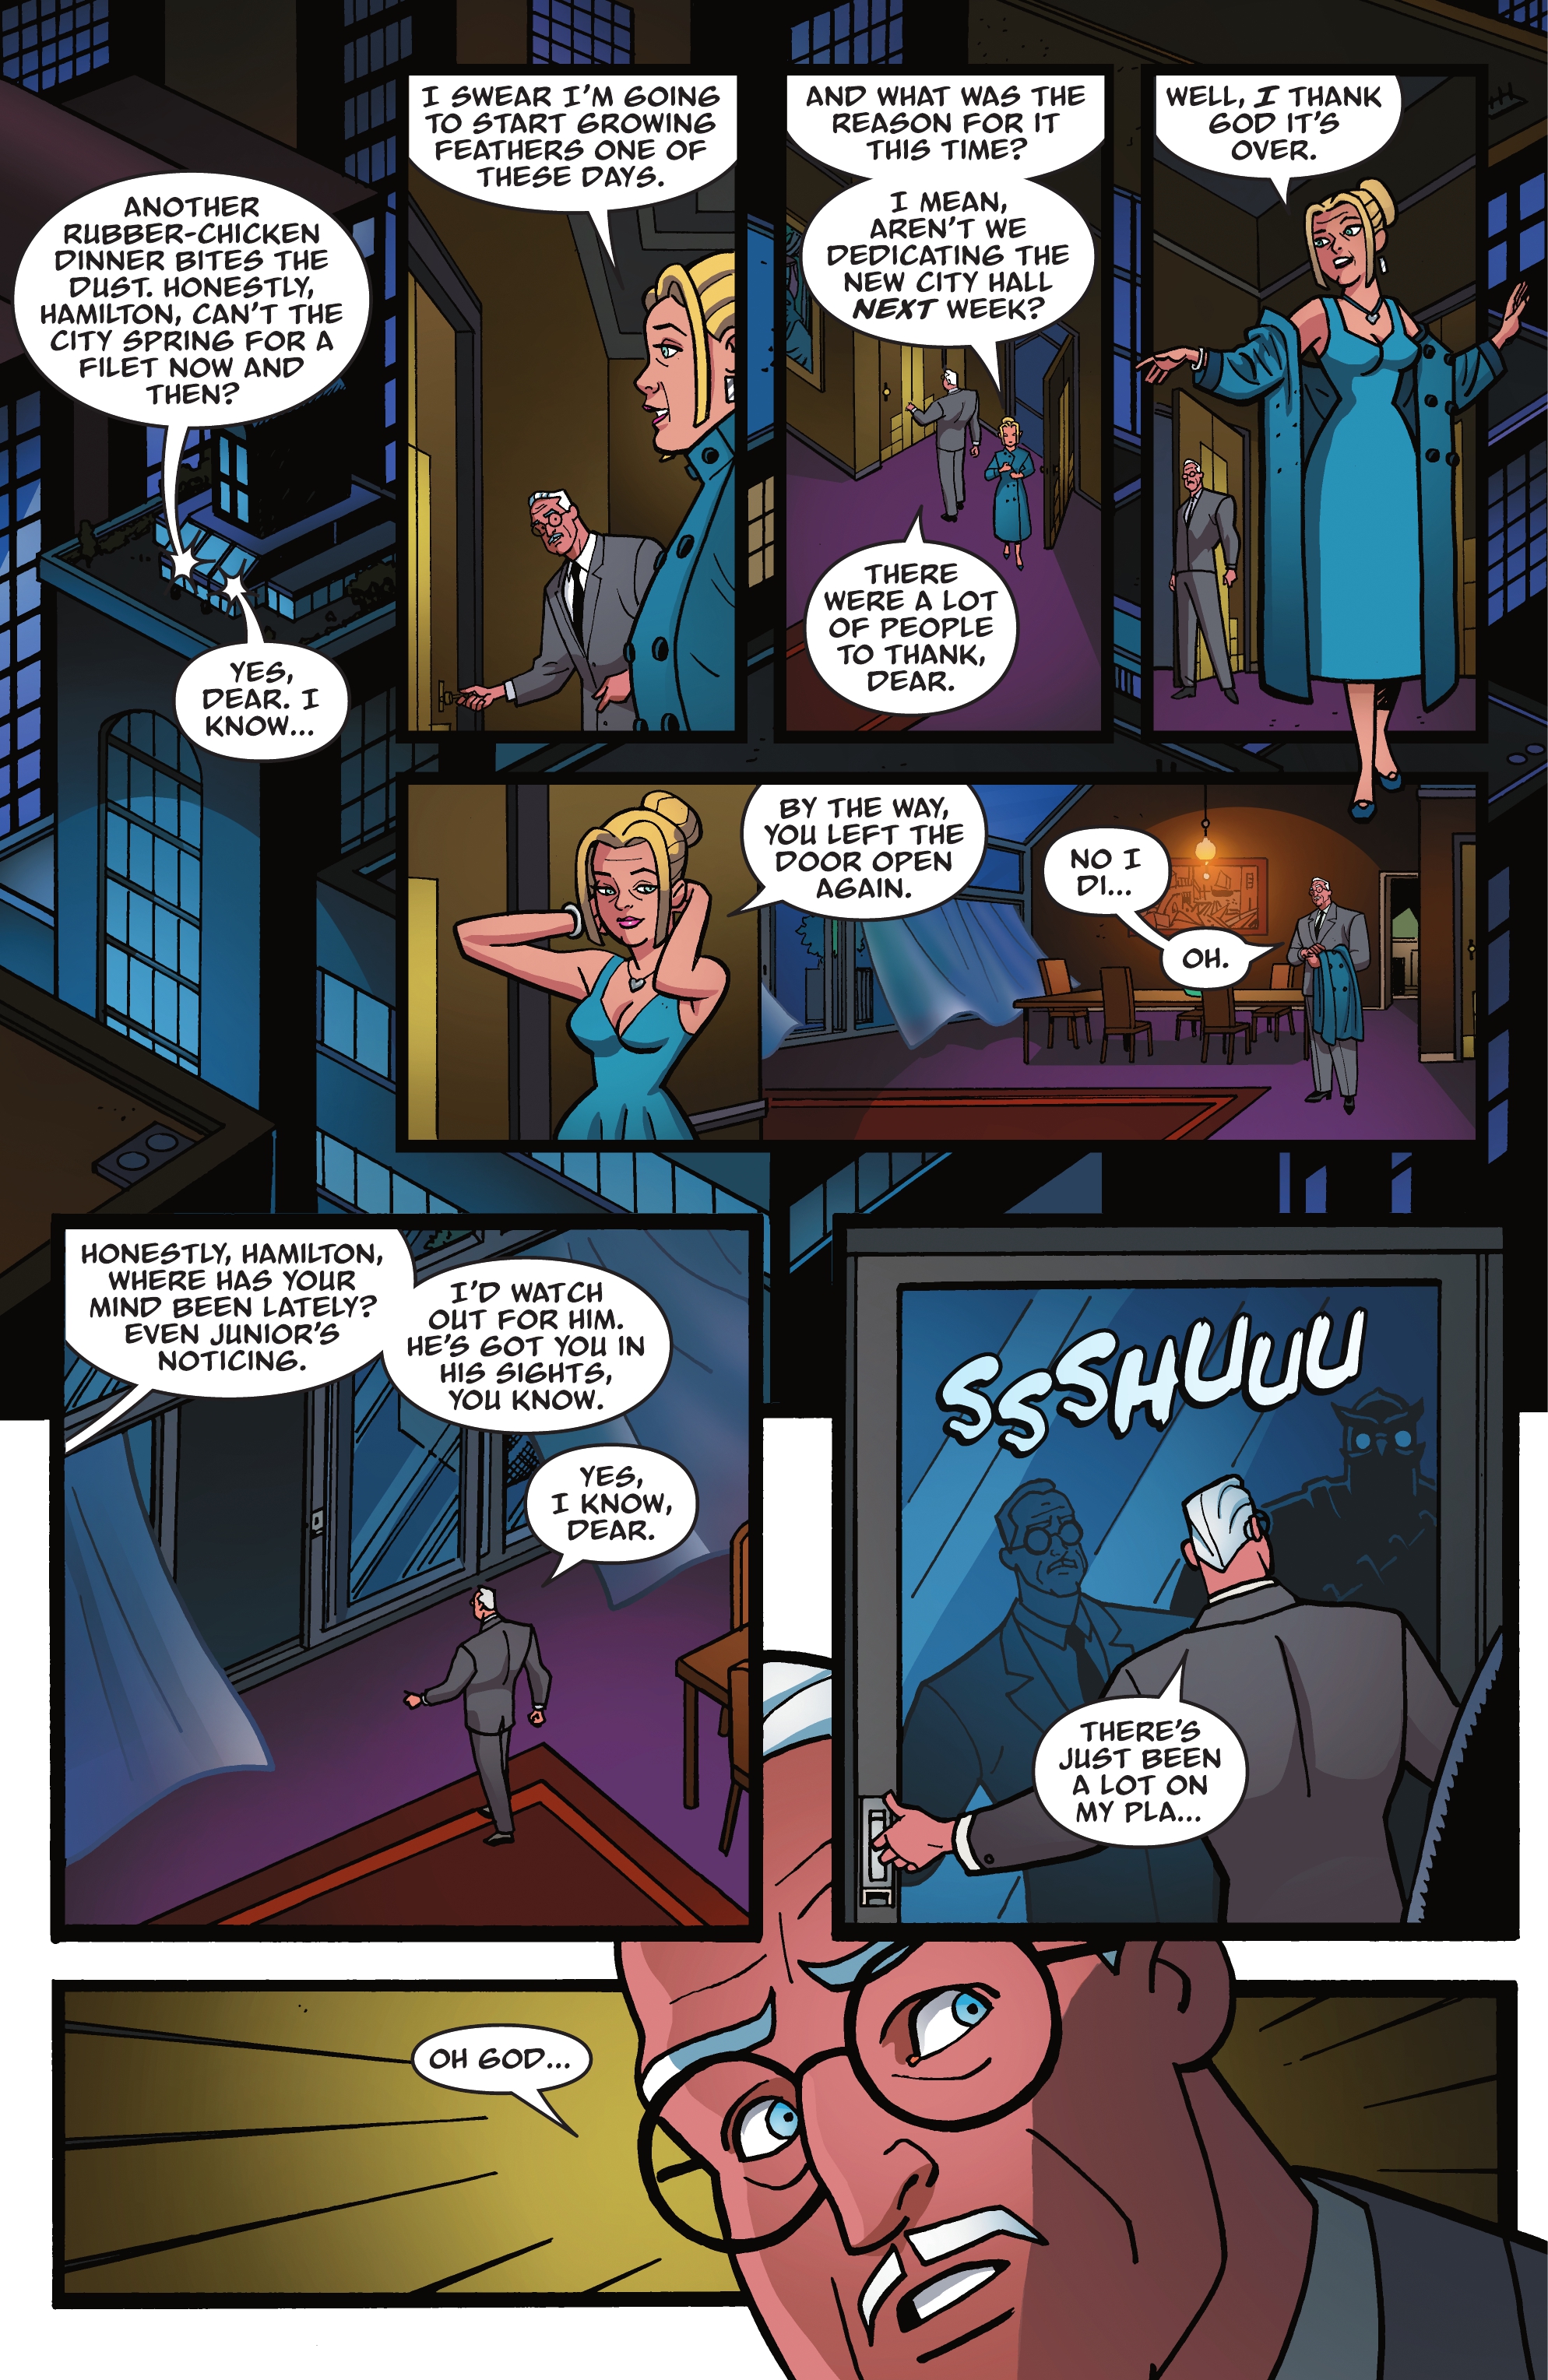 Batman: The Adventures Continue: Season Two (2021-): Chapter 1 - Page 3